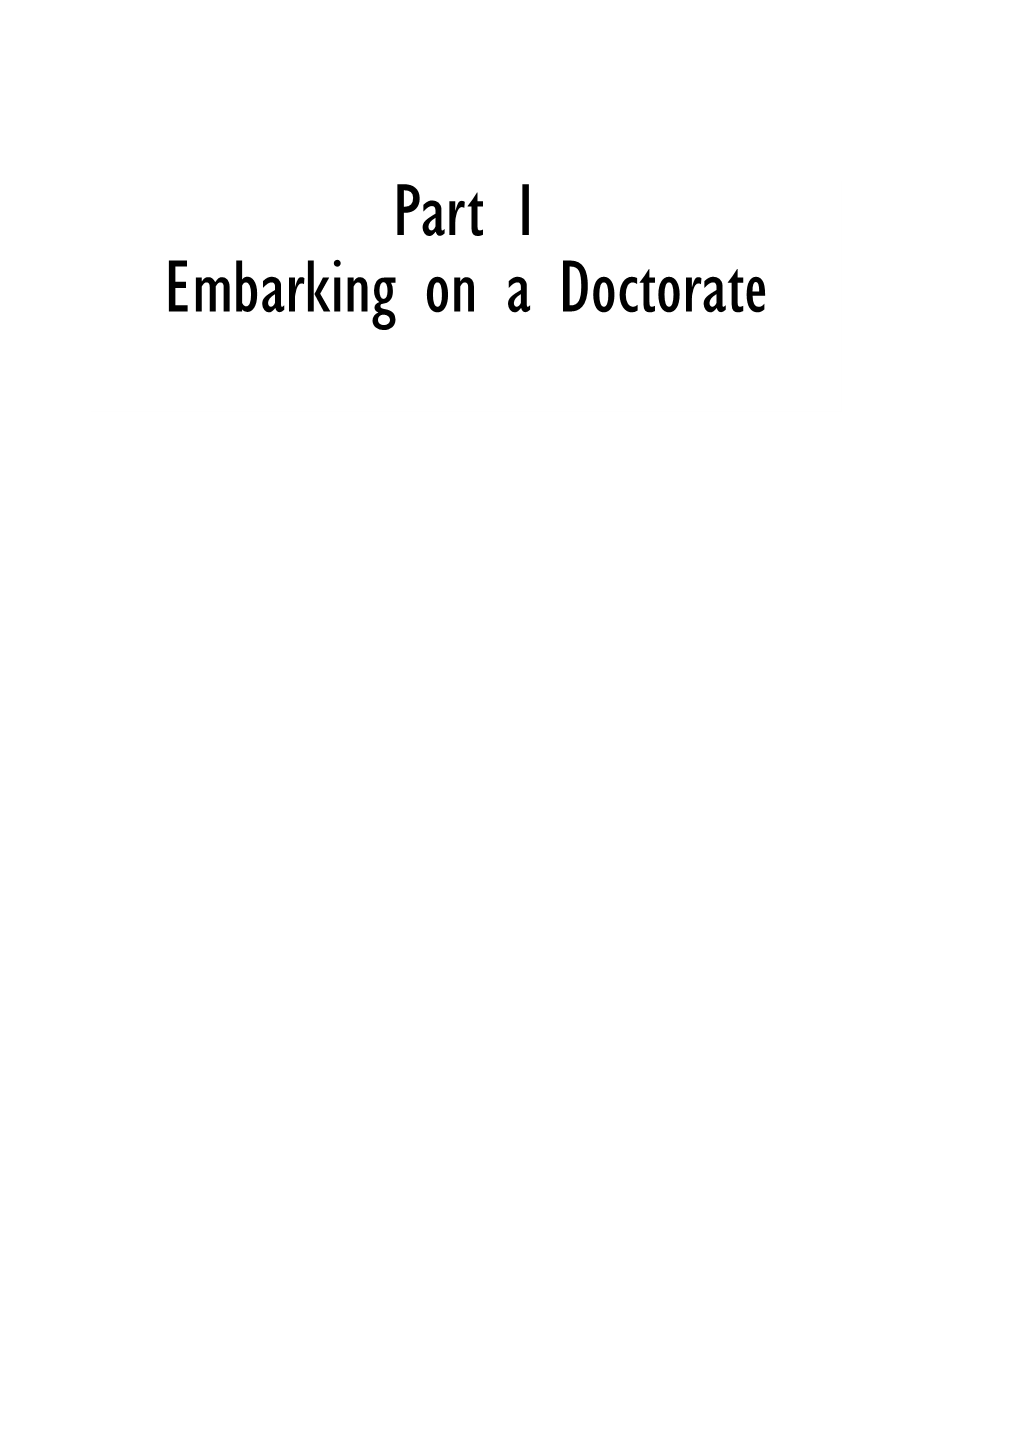 Part 1 Embarking on a Doctorate